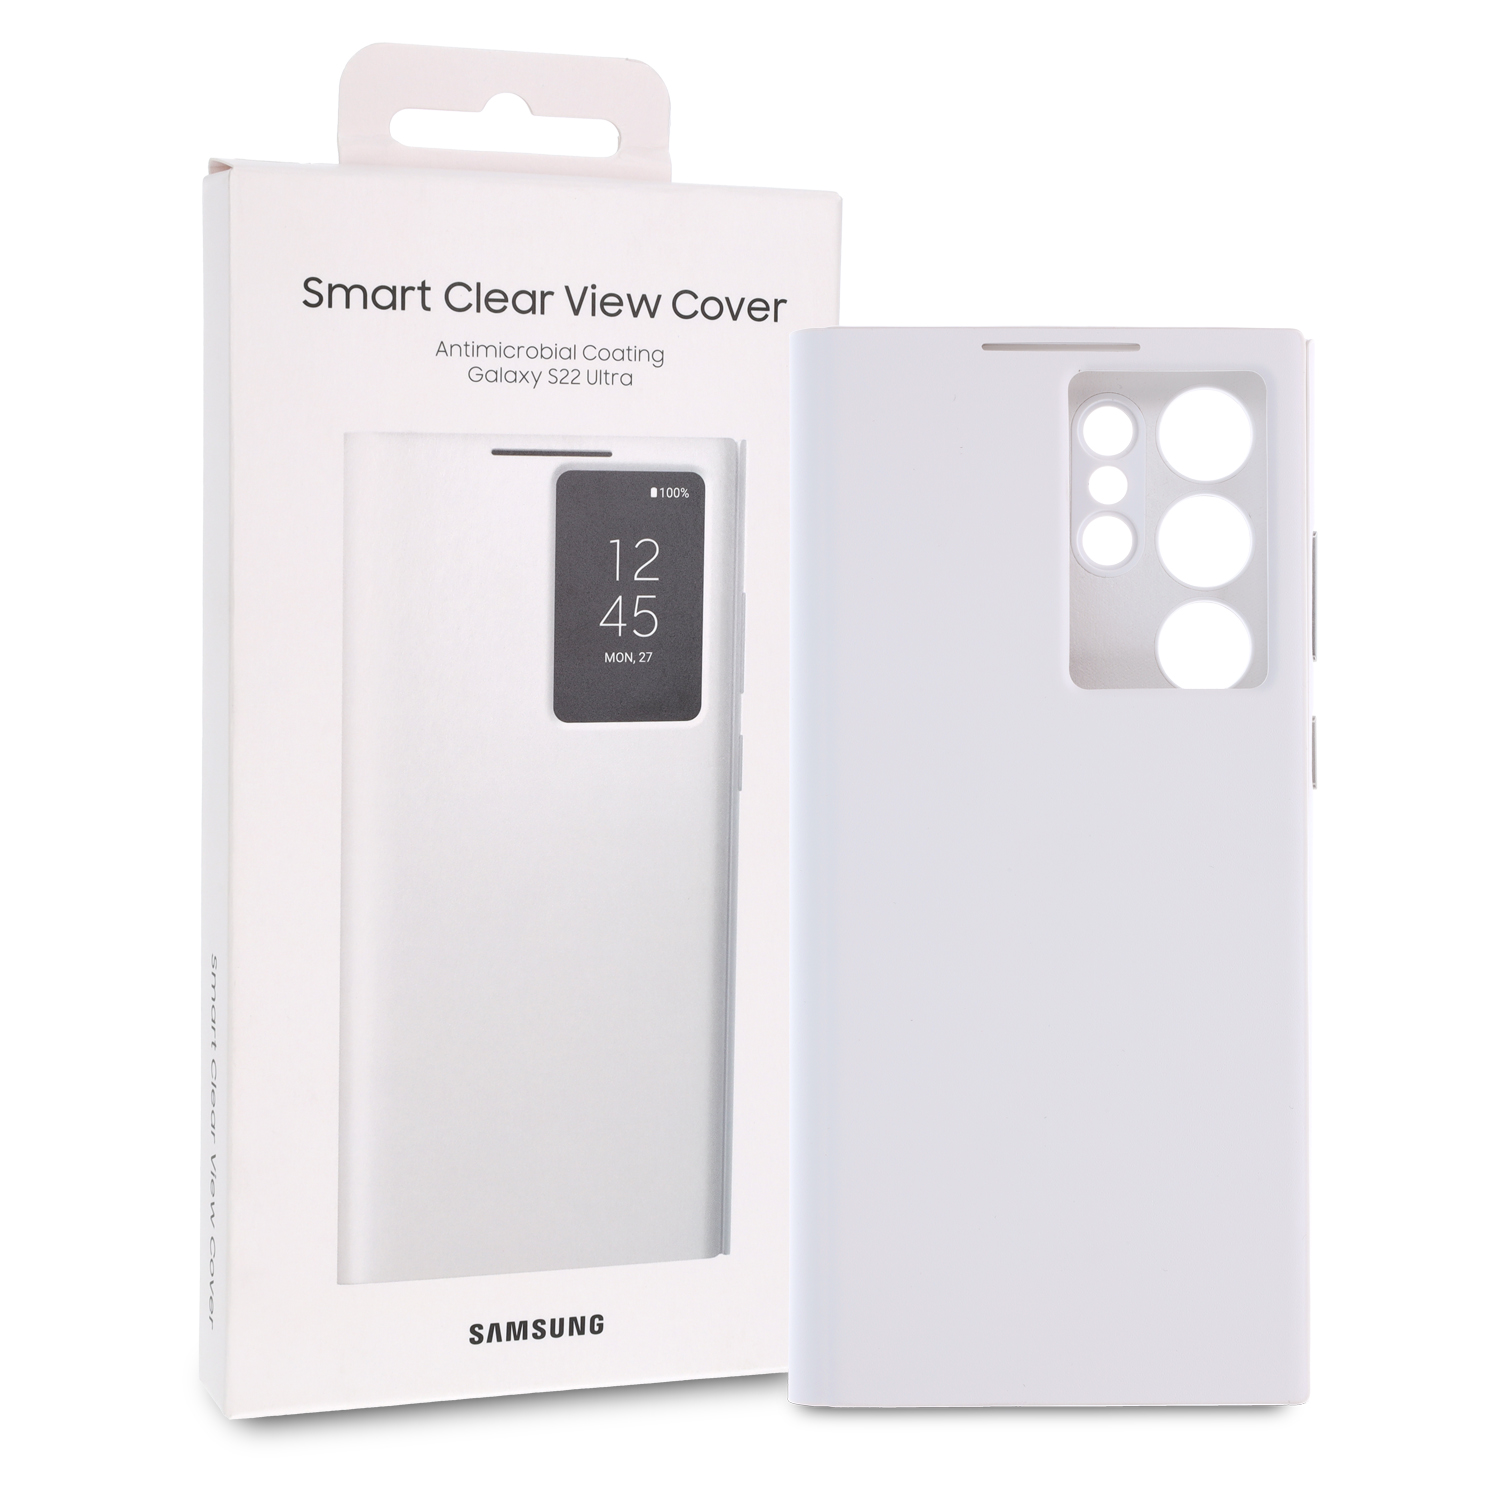 Samsung Galaxy S22 Ultra (S908B/DS) Smart Clear View Cover EF-ZS908CWEGEE White